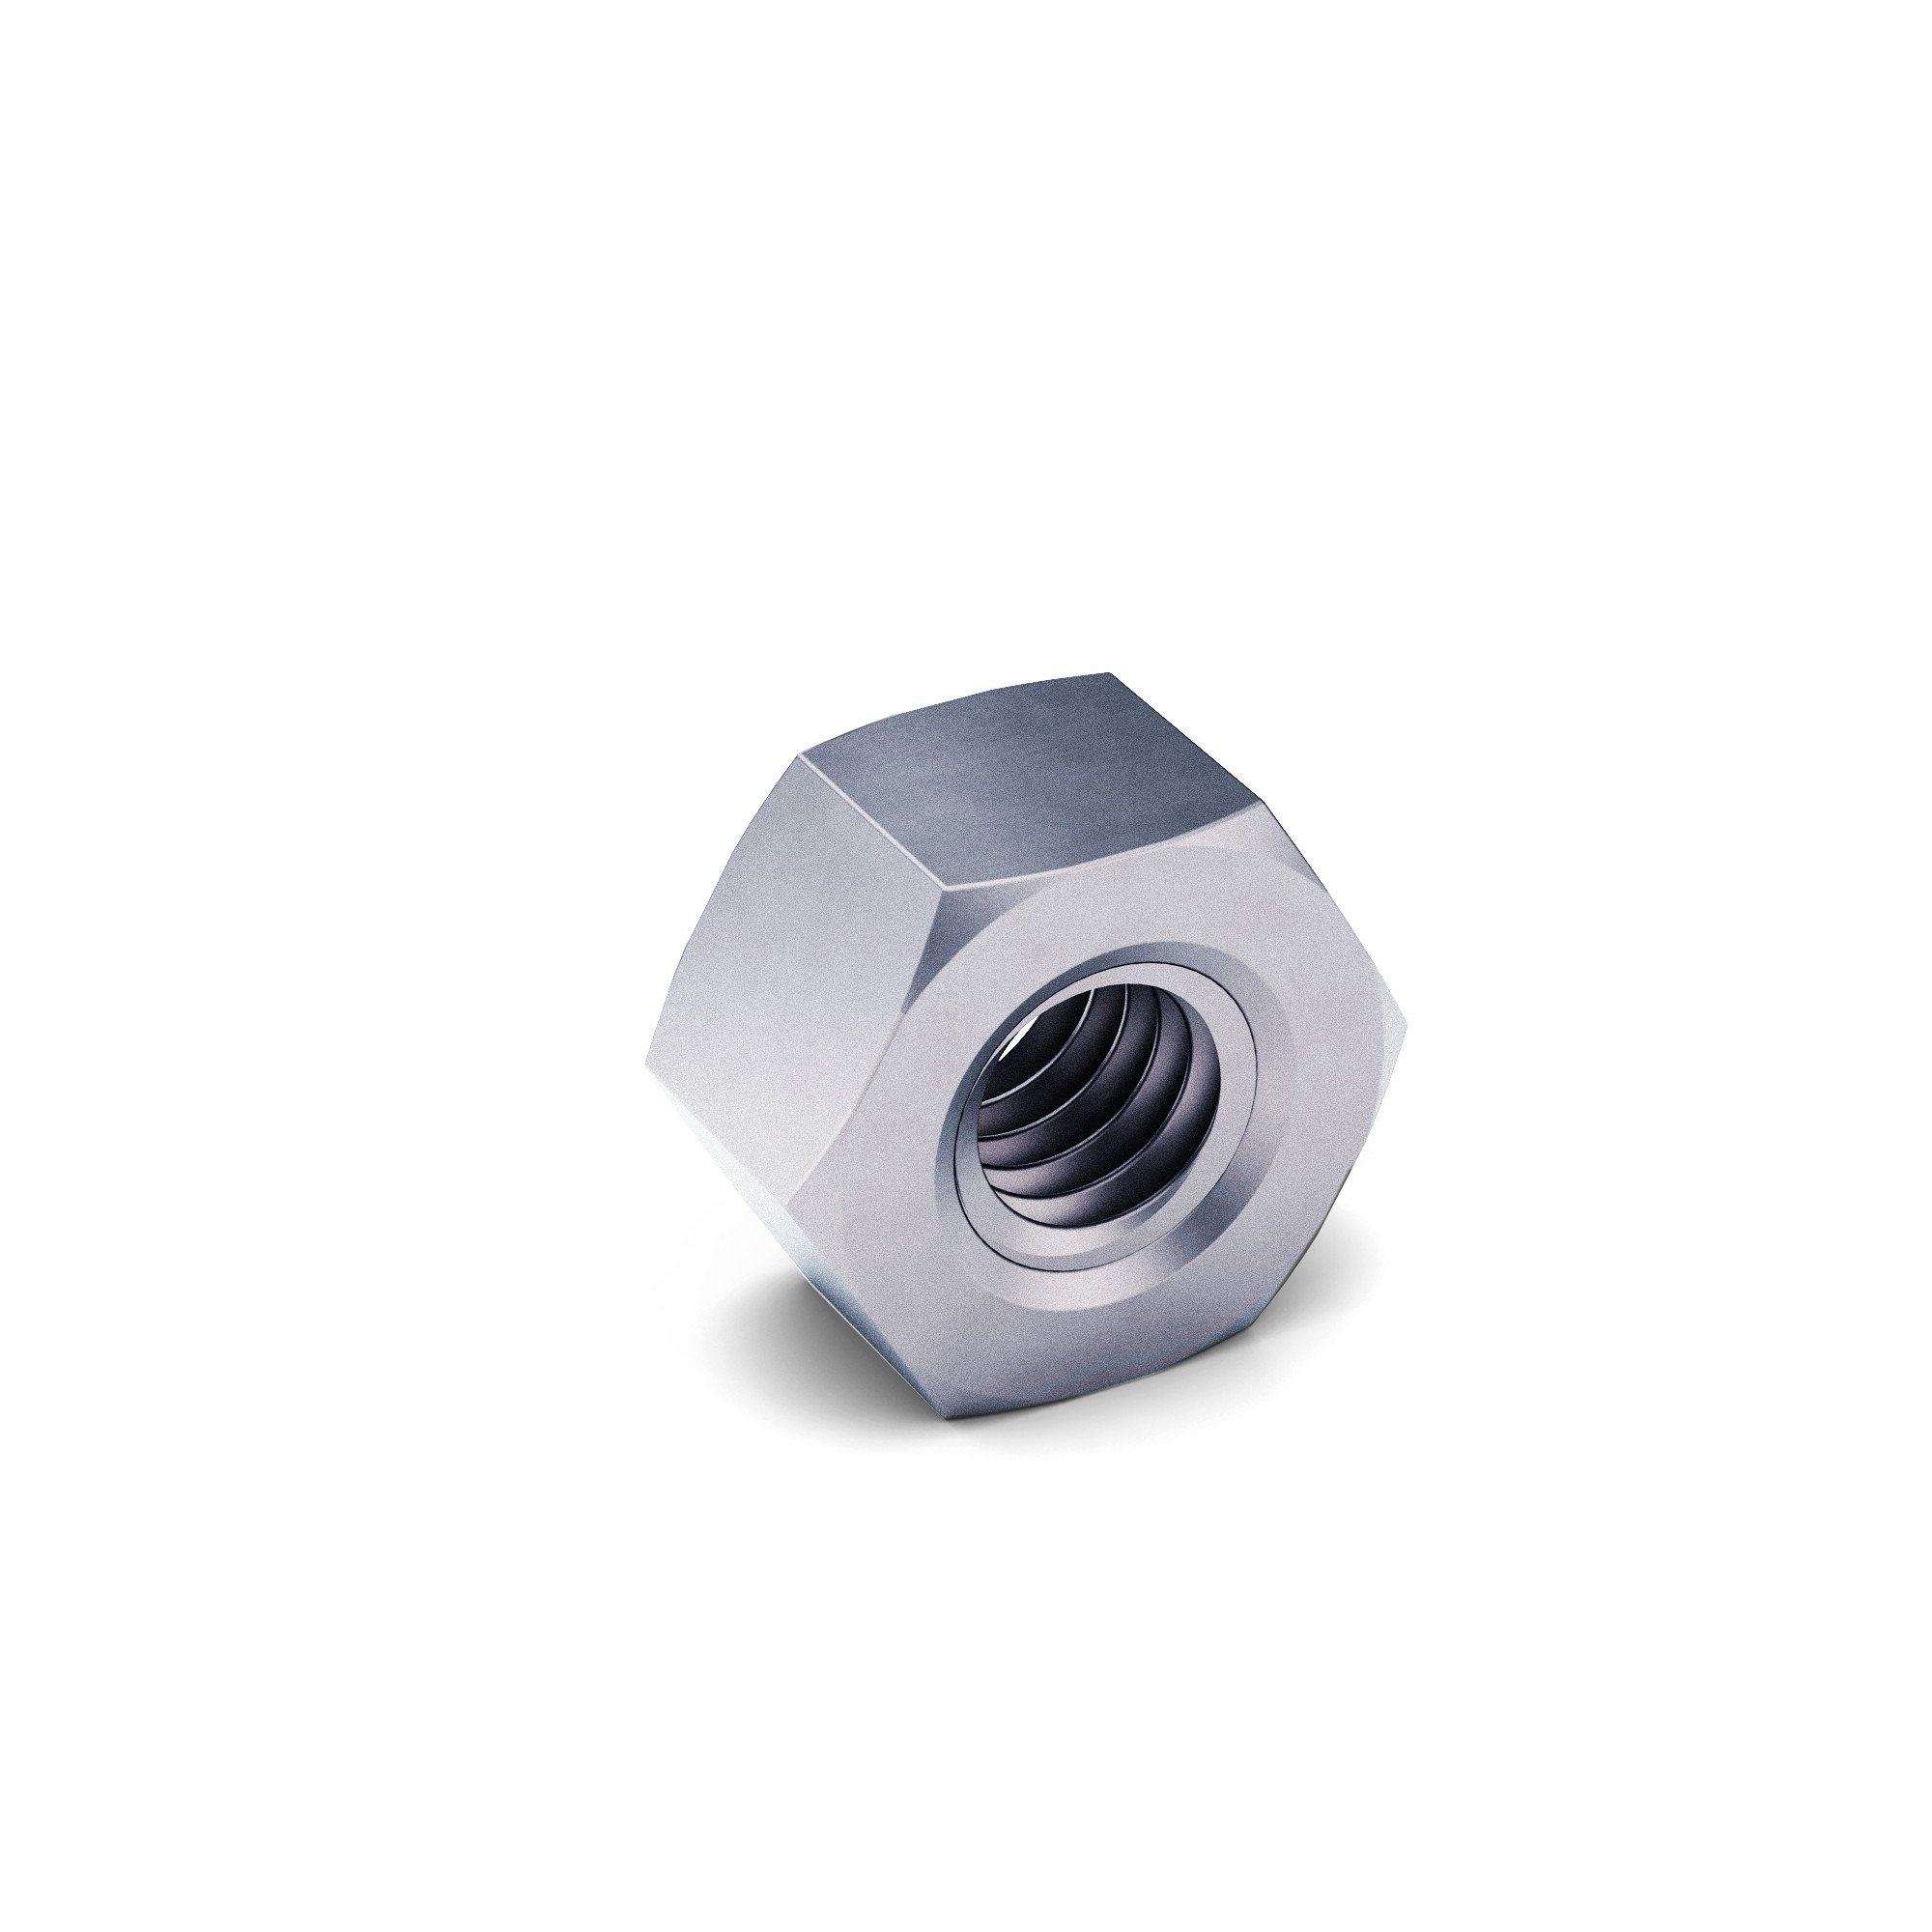 7/16-14 J995 GR 5 Hex Nut Zinc Clear Trivalent Old Style 5/8 WAF